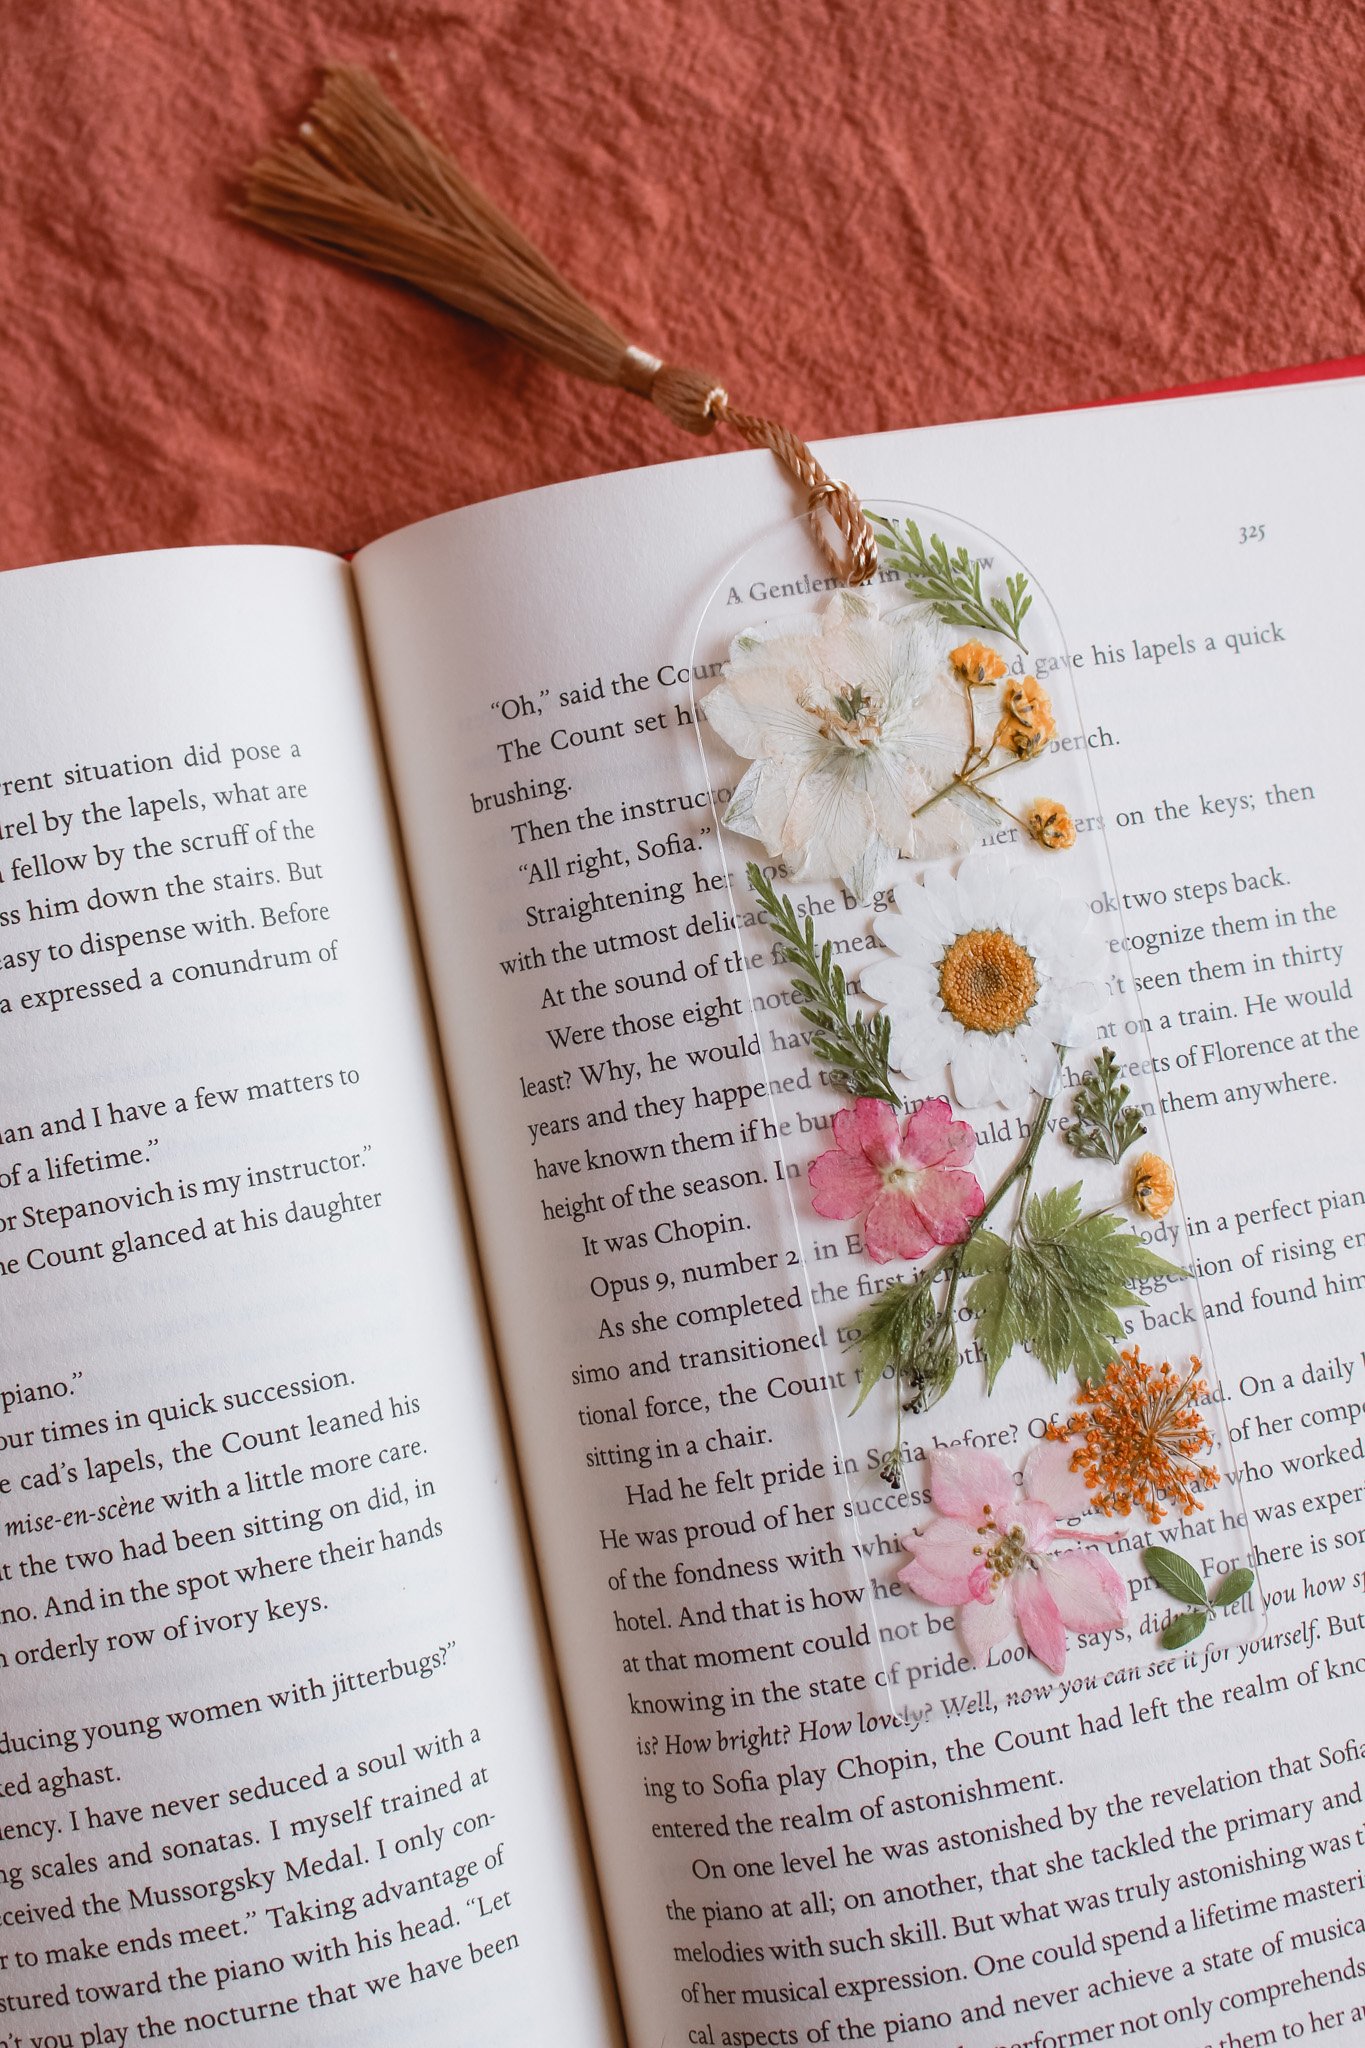 How To Make Pressed Flower Bookmarks - Little Day Out